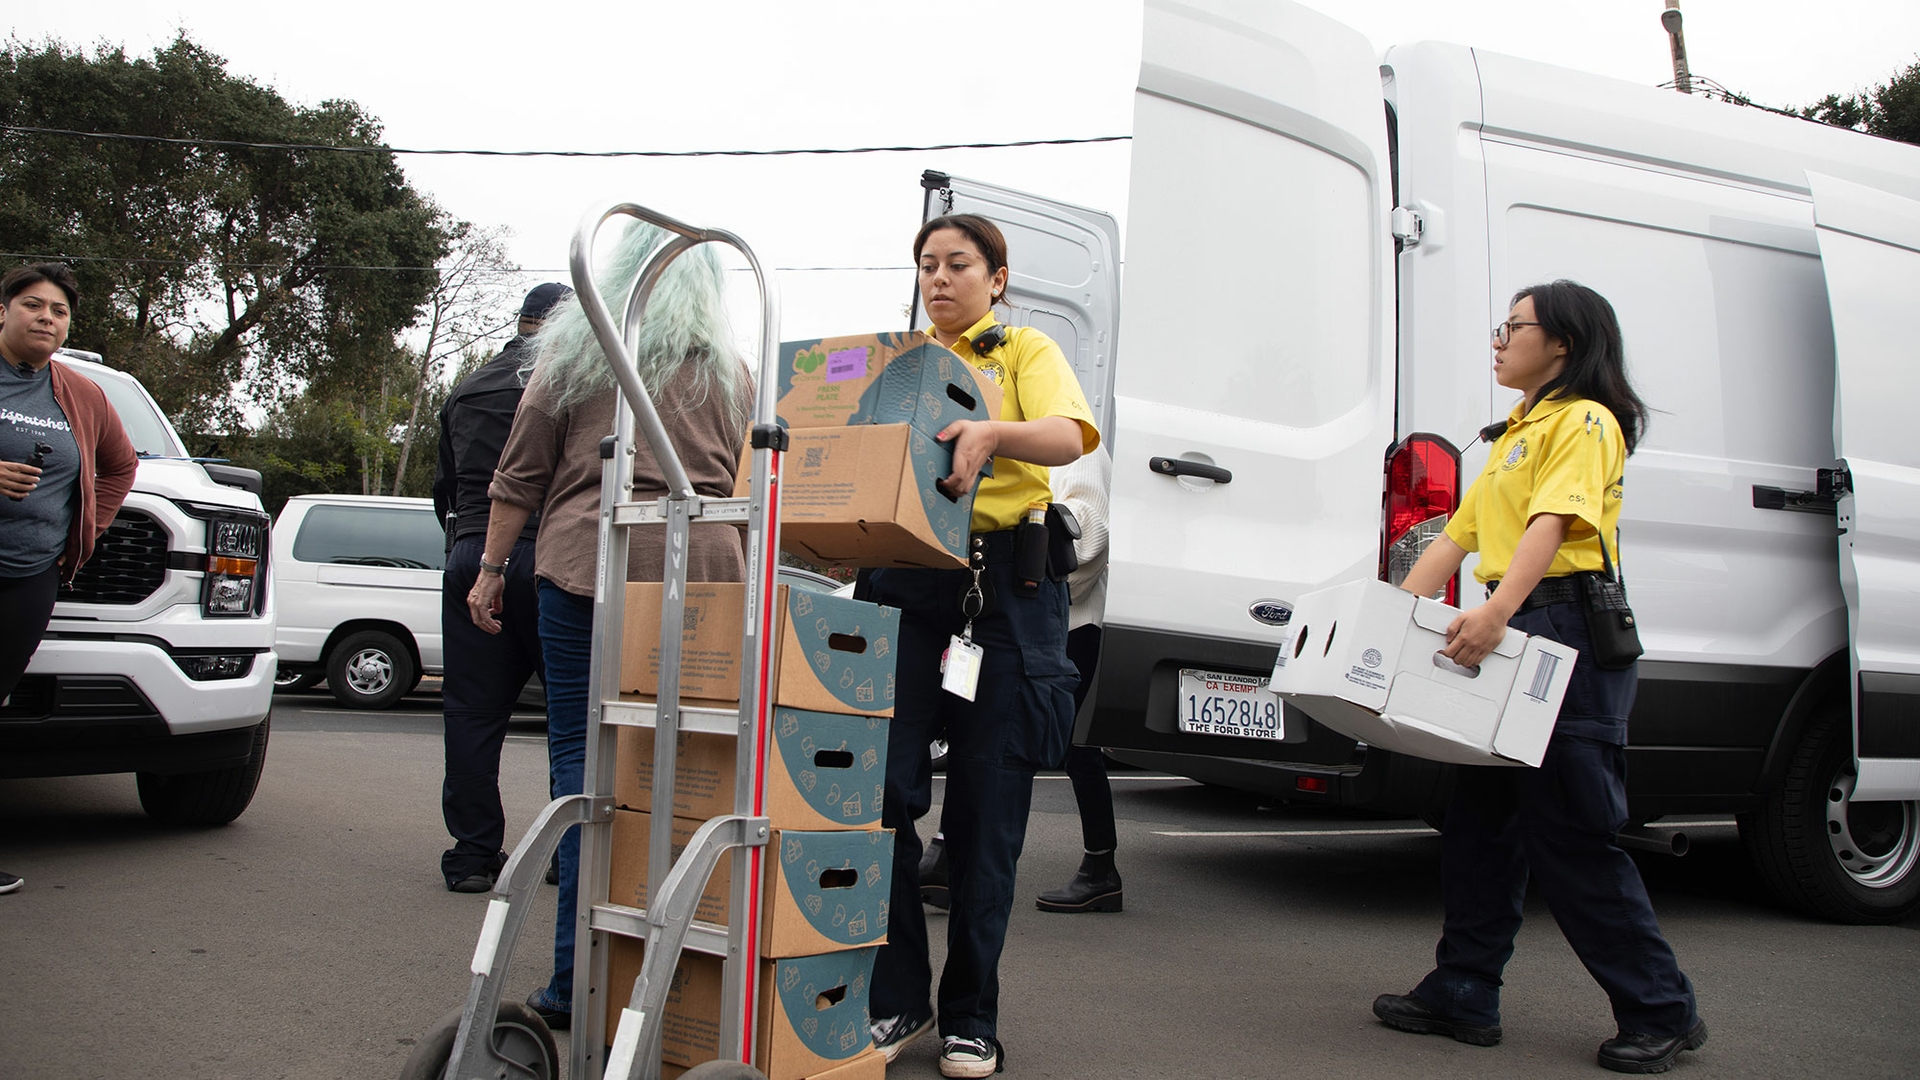 Volunteers wearing yellow shirts and black pants unload boxes from the back of a white van and stack them onto a dolly.